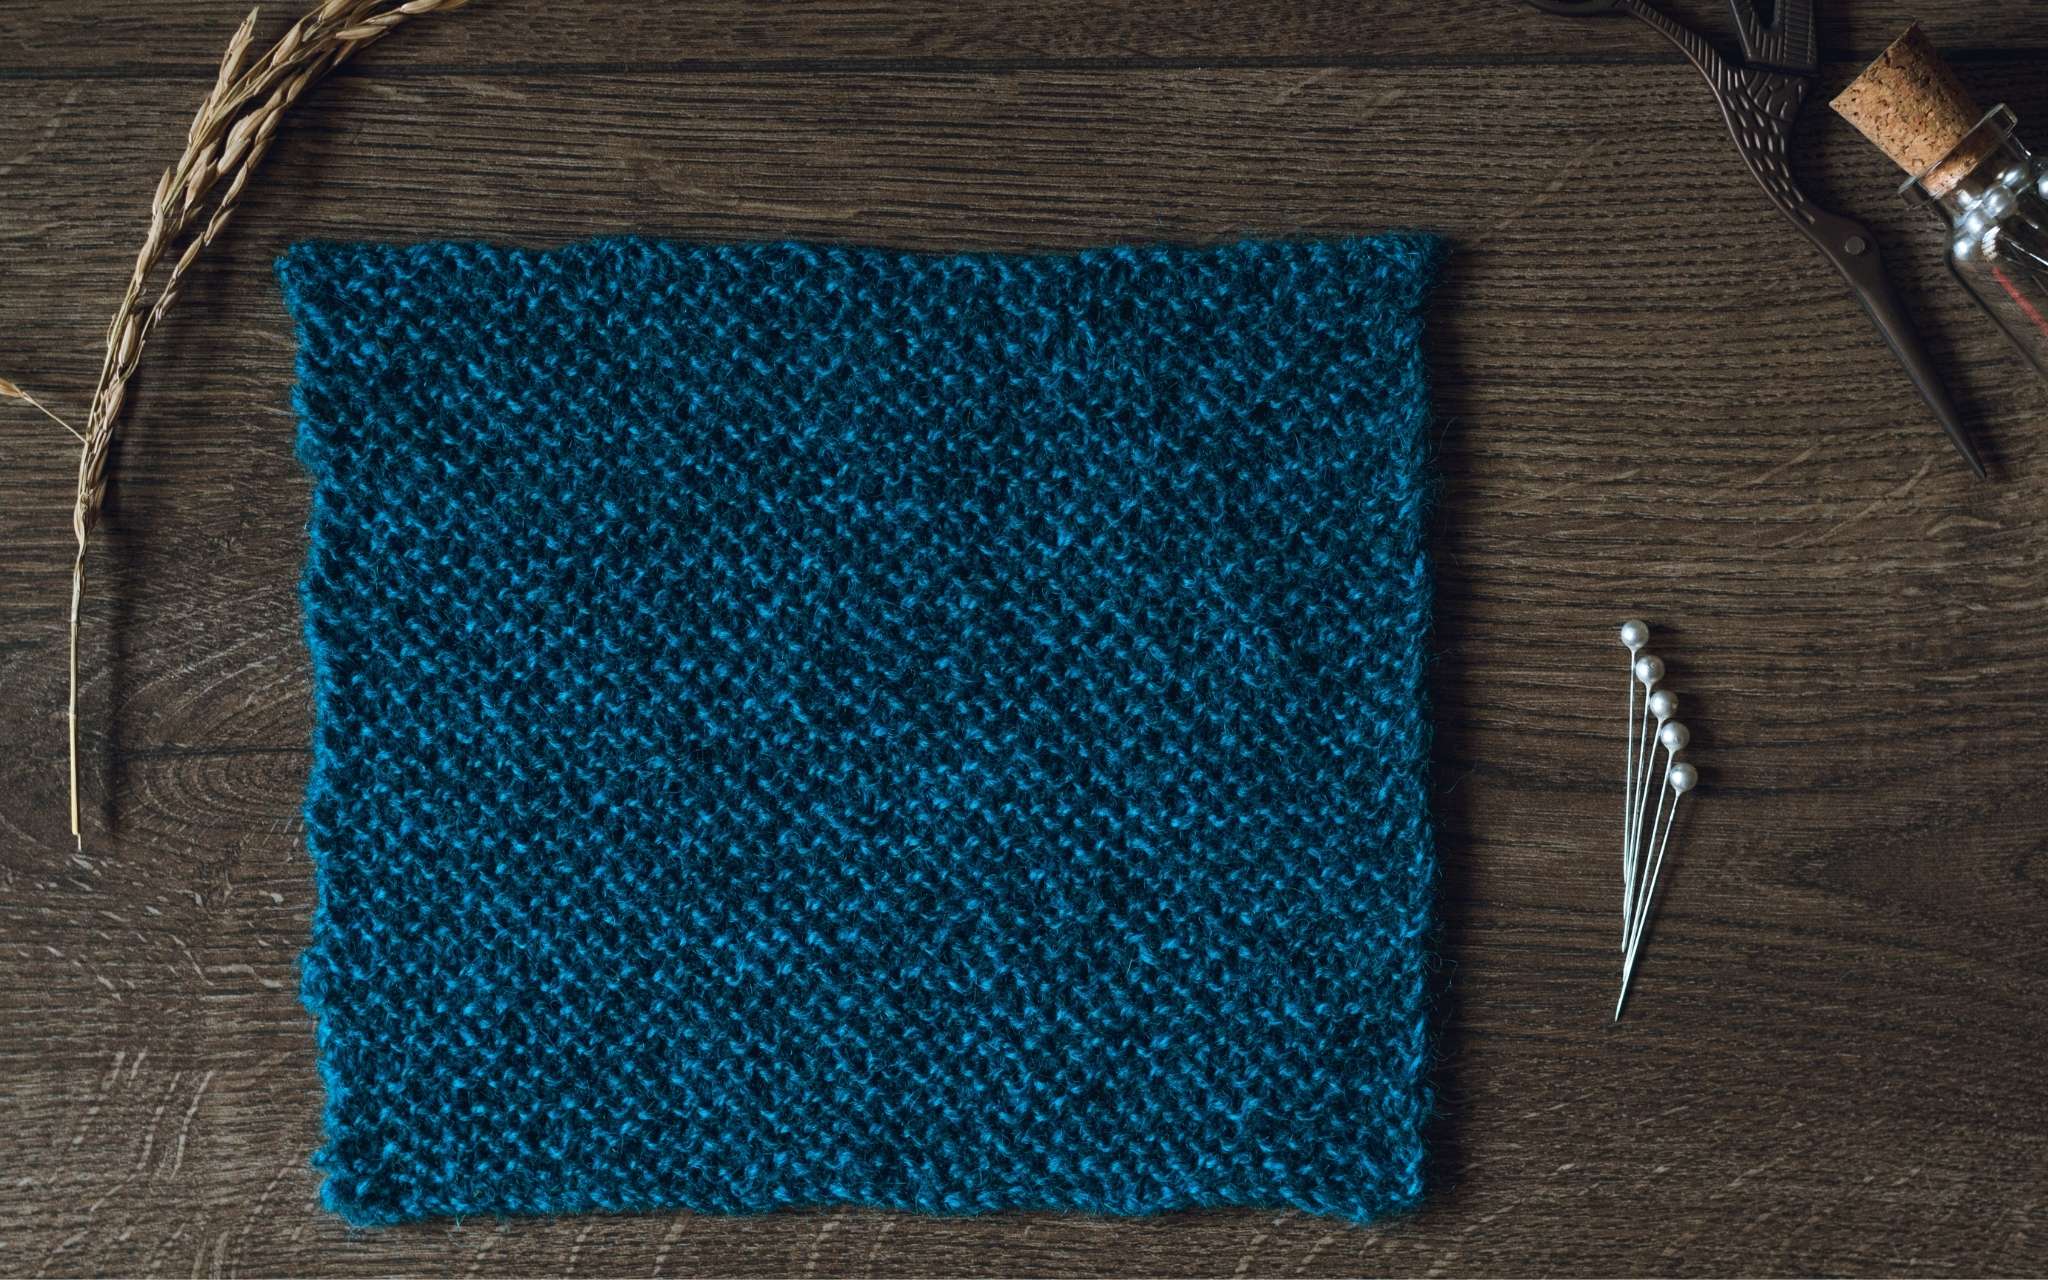 A swatch of garter stitch in dark blue laid flat on a wooden surface. There are some dried stems, scissors and a bottle of pints to the side.